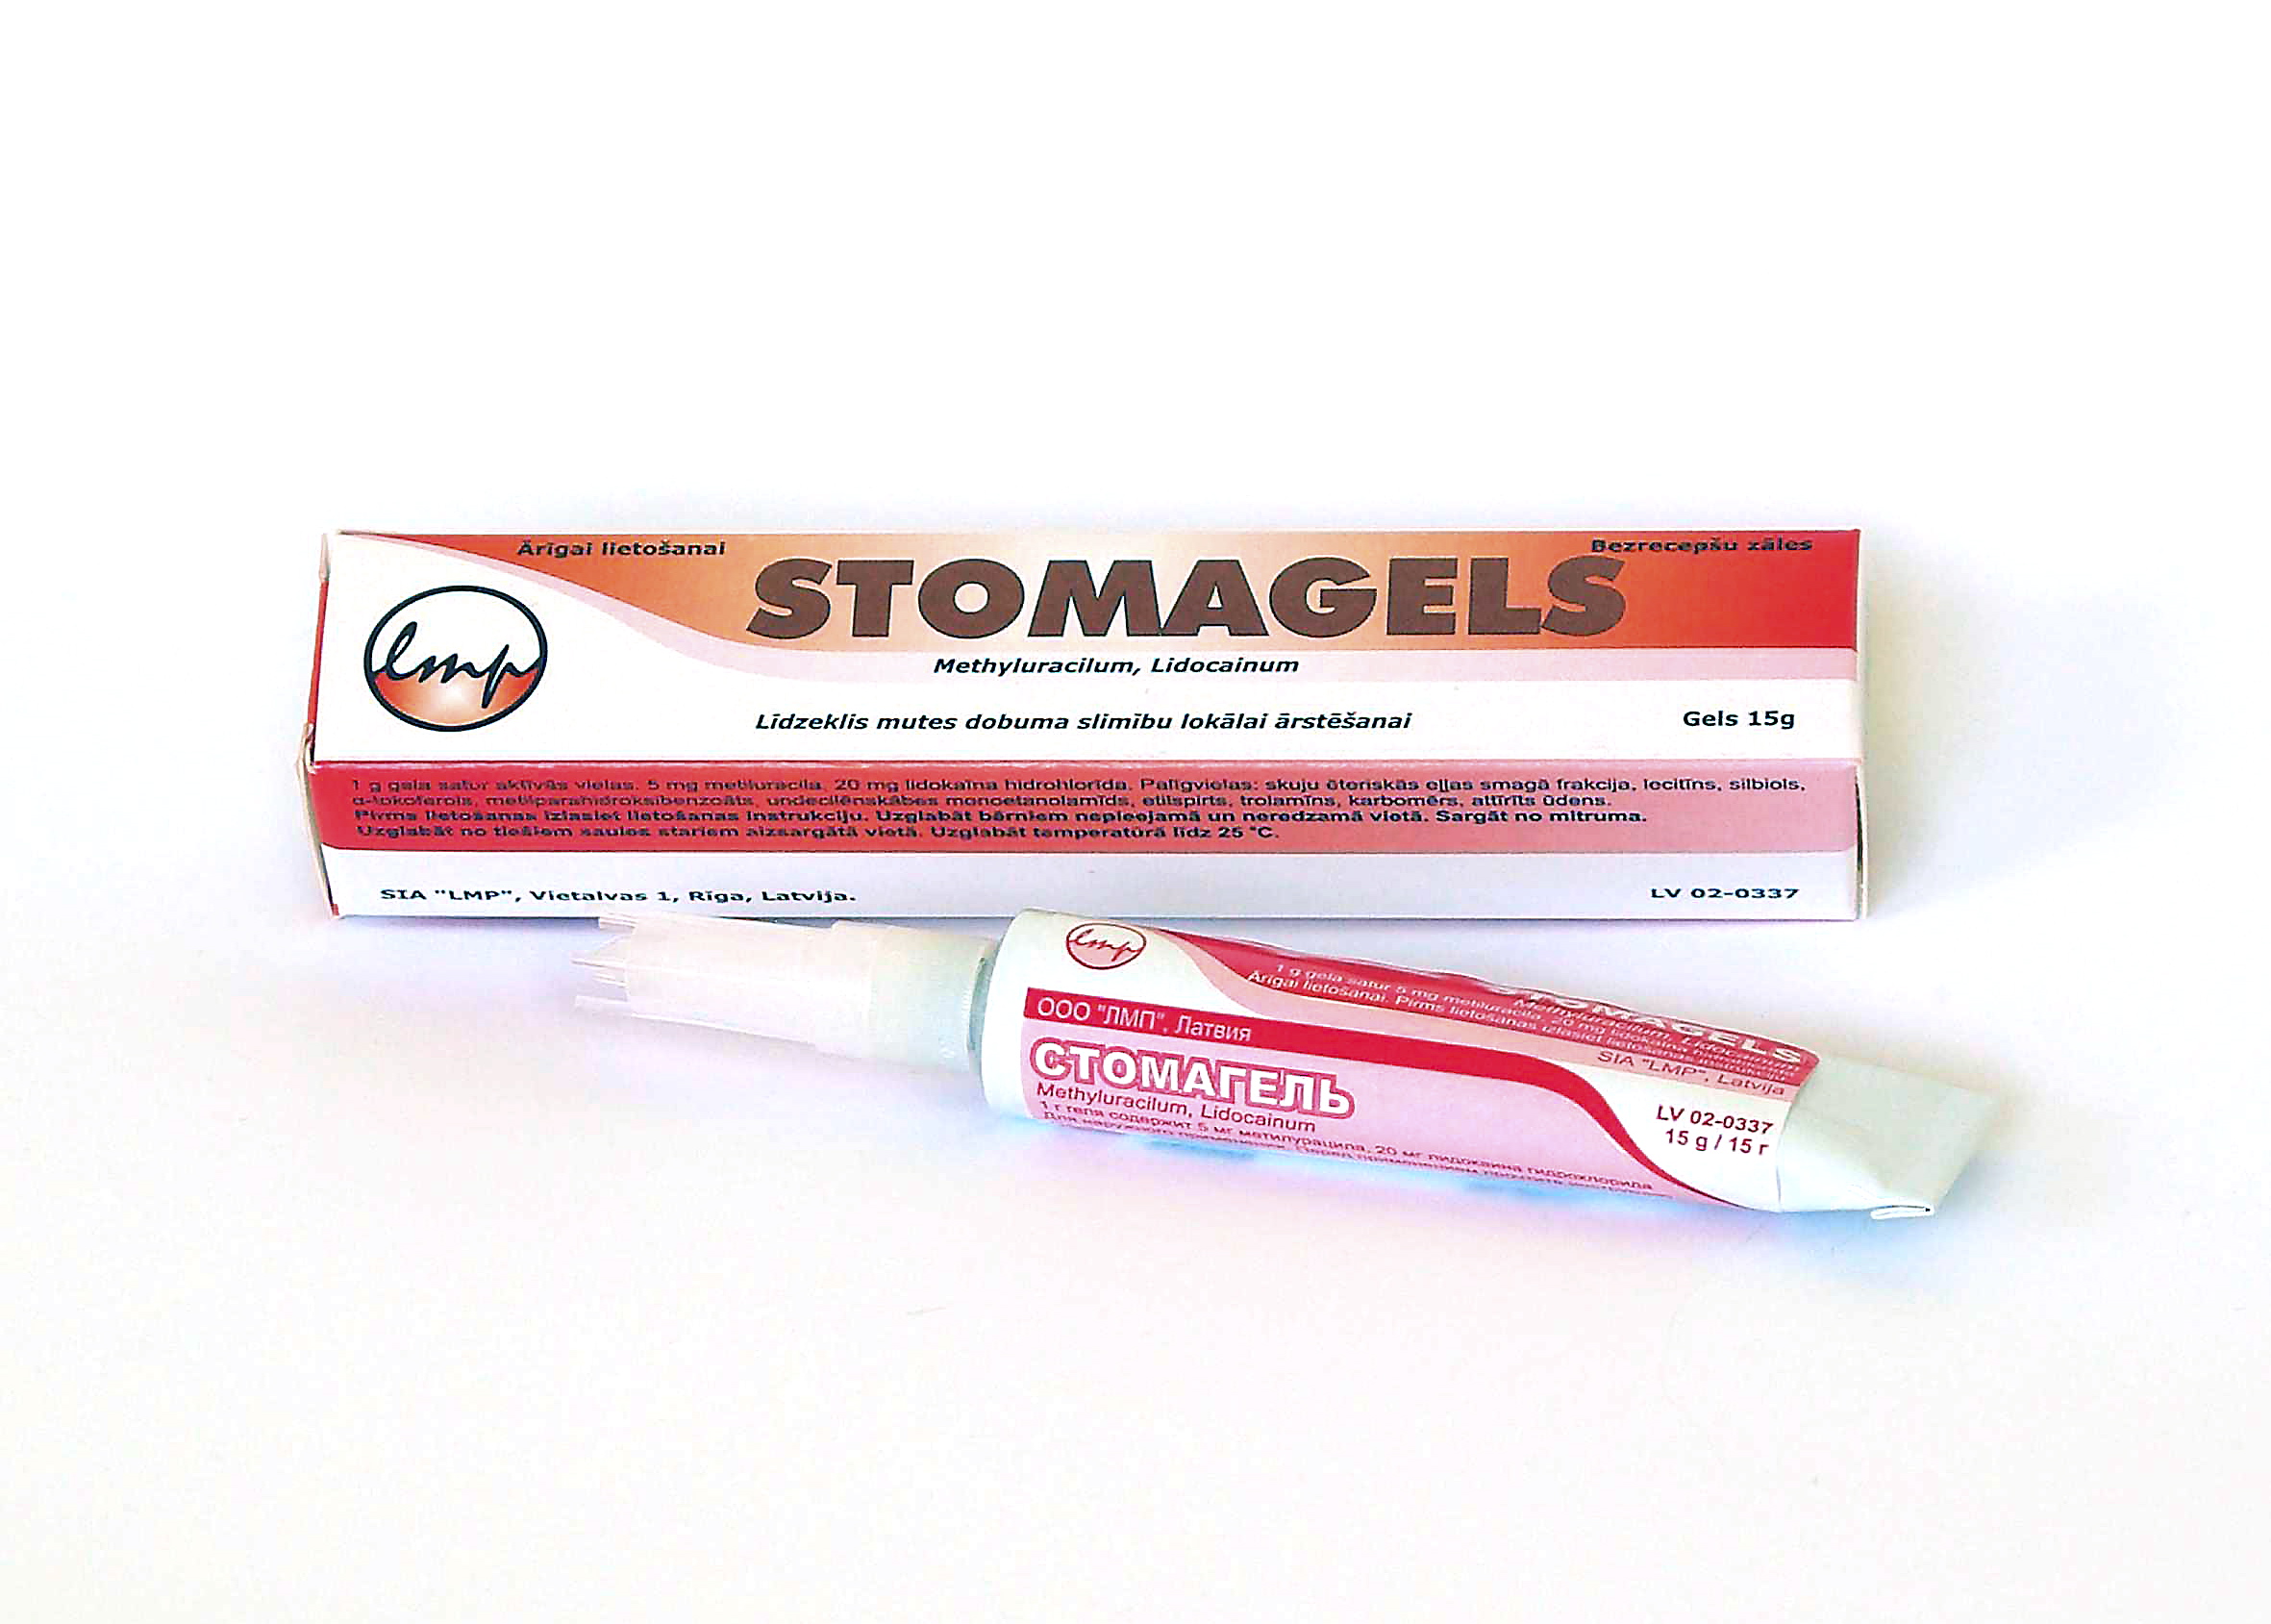 Stomagels